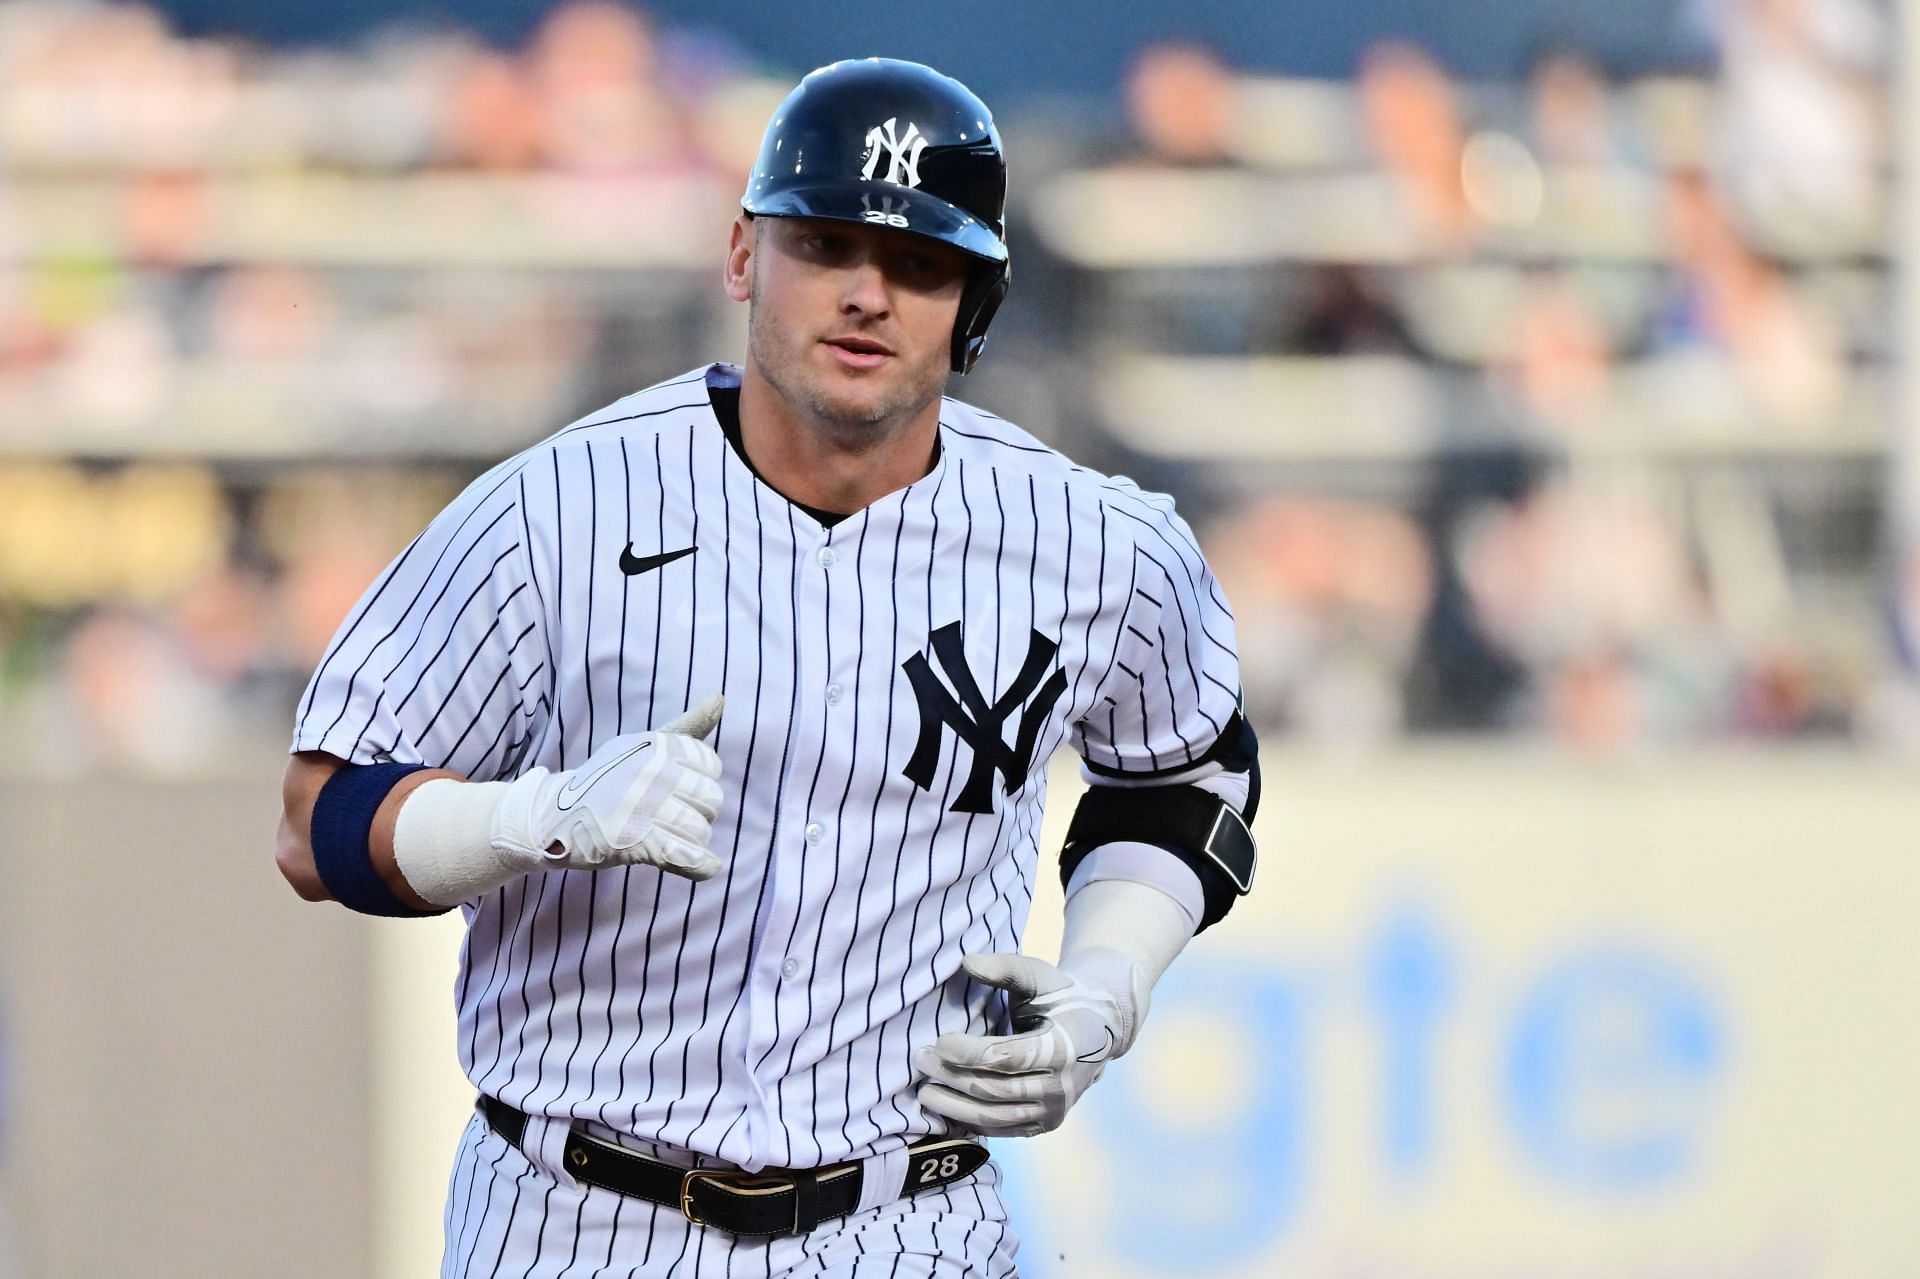 Yankees' Josh Donaldson looks 'locked in' after crushing homer in 1st game  